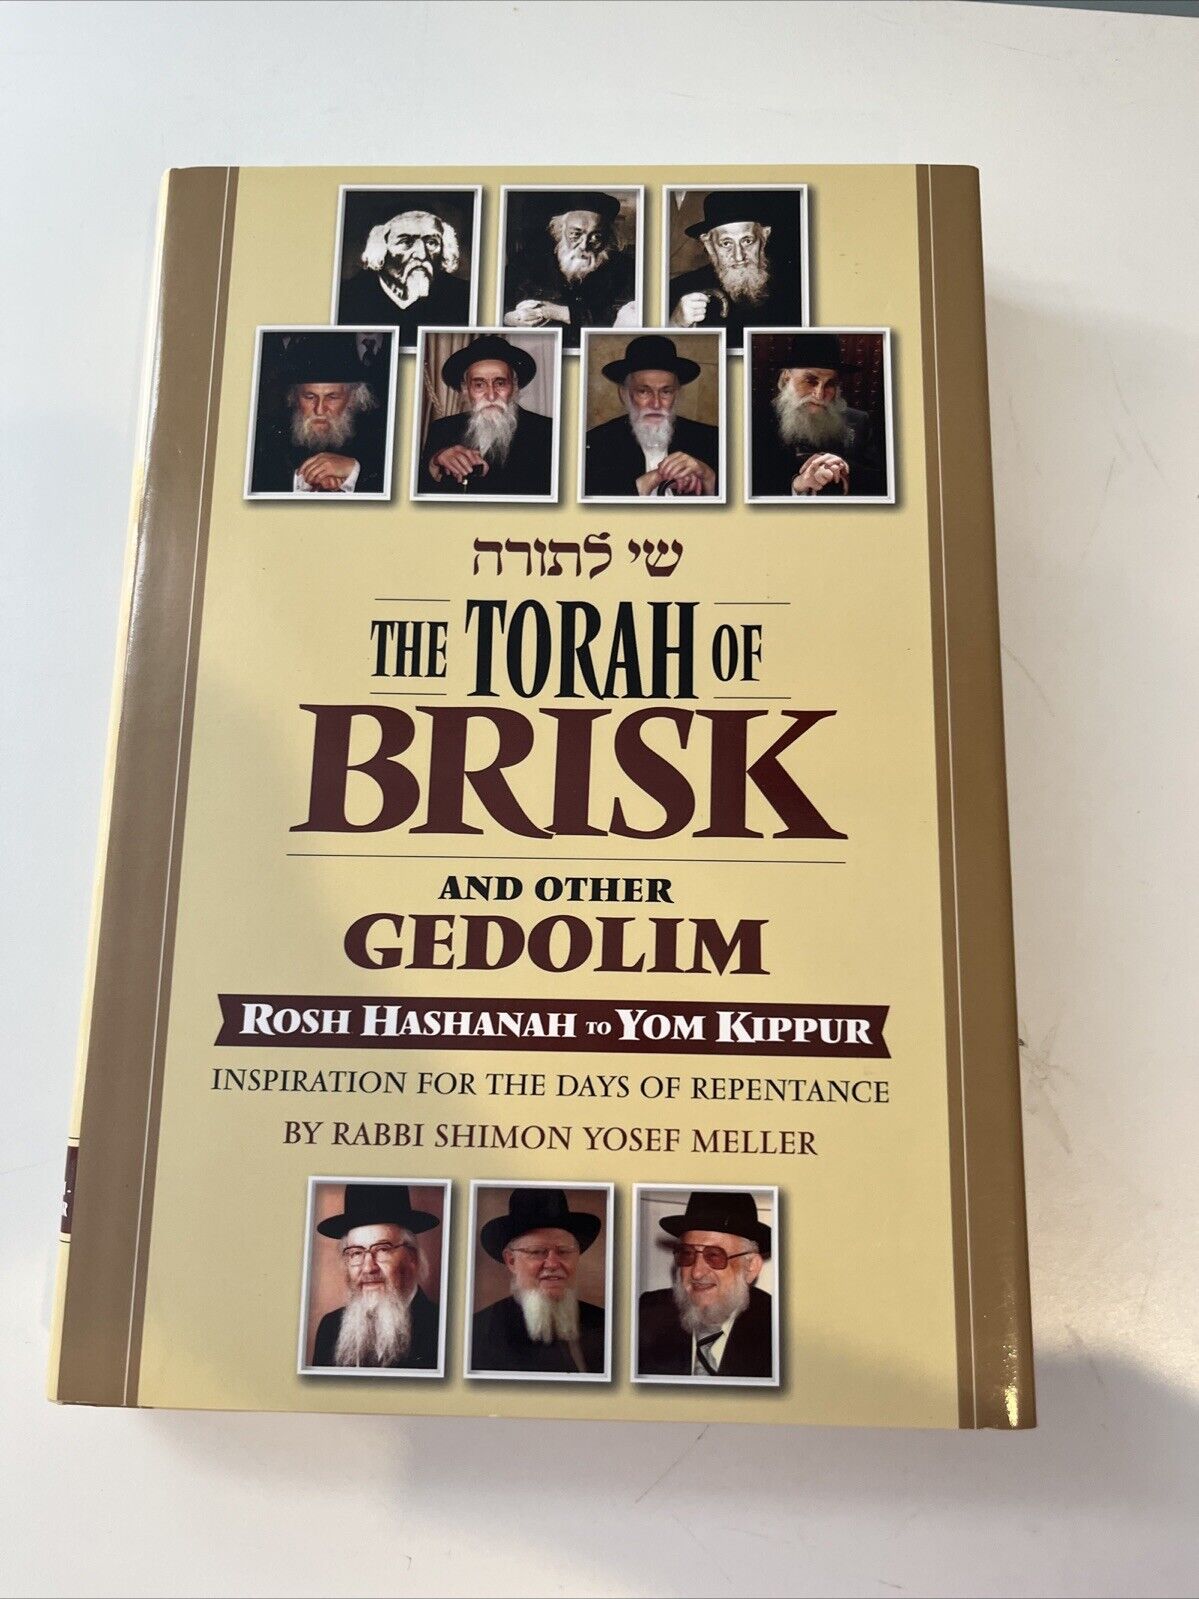 The Torah Of Brisk, Inspiration For The Days Of Repentance